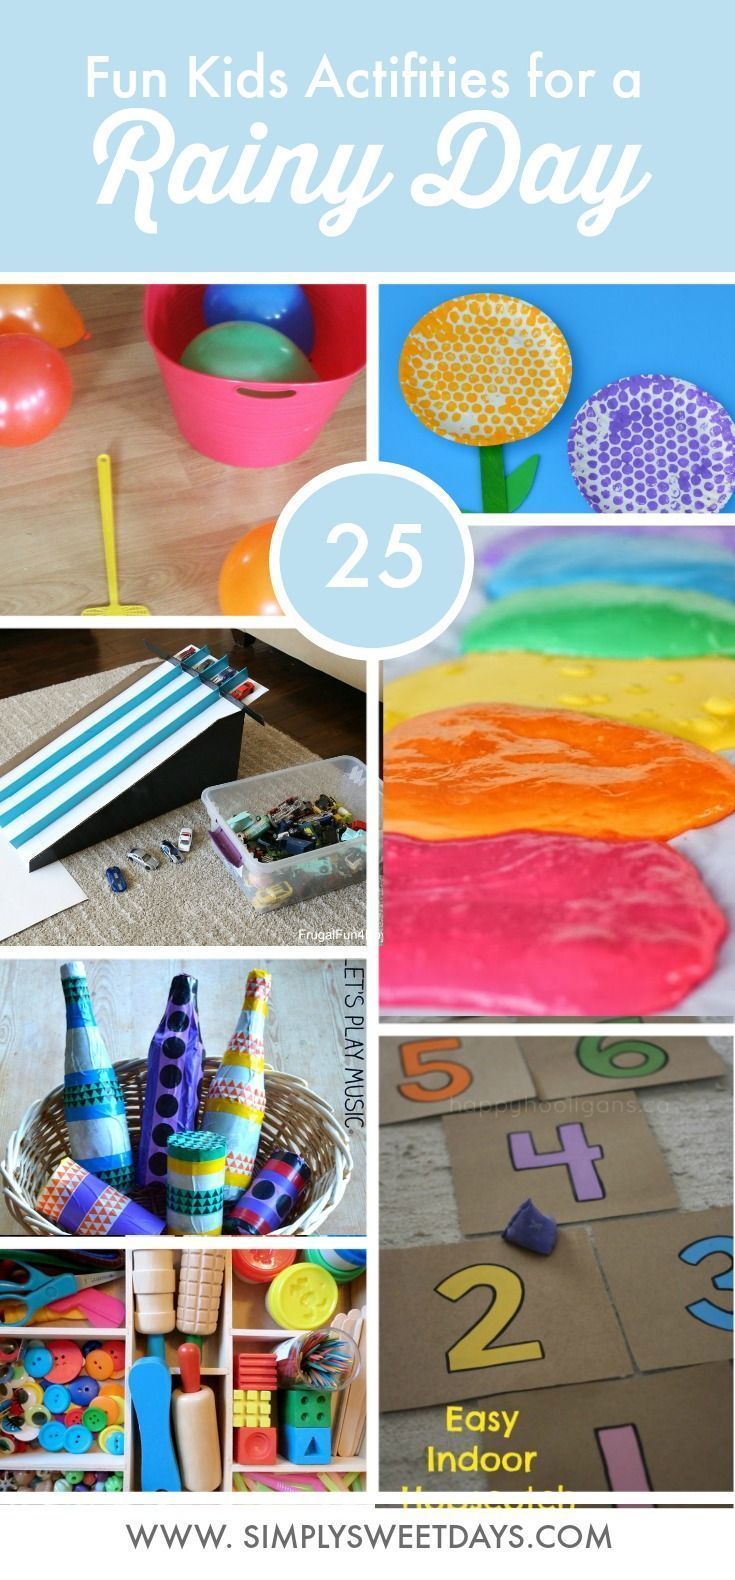 25 Fun Things to do on a Rainy Day with Kids | Simply Sweet Days - 25 Fun Things to do on a Rainy Day with Kids | Simply Sweet Days -   17 rainy day diy For Teens ideas